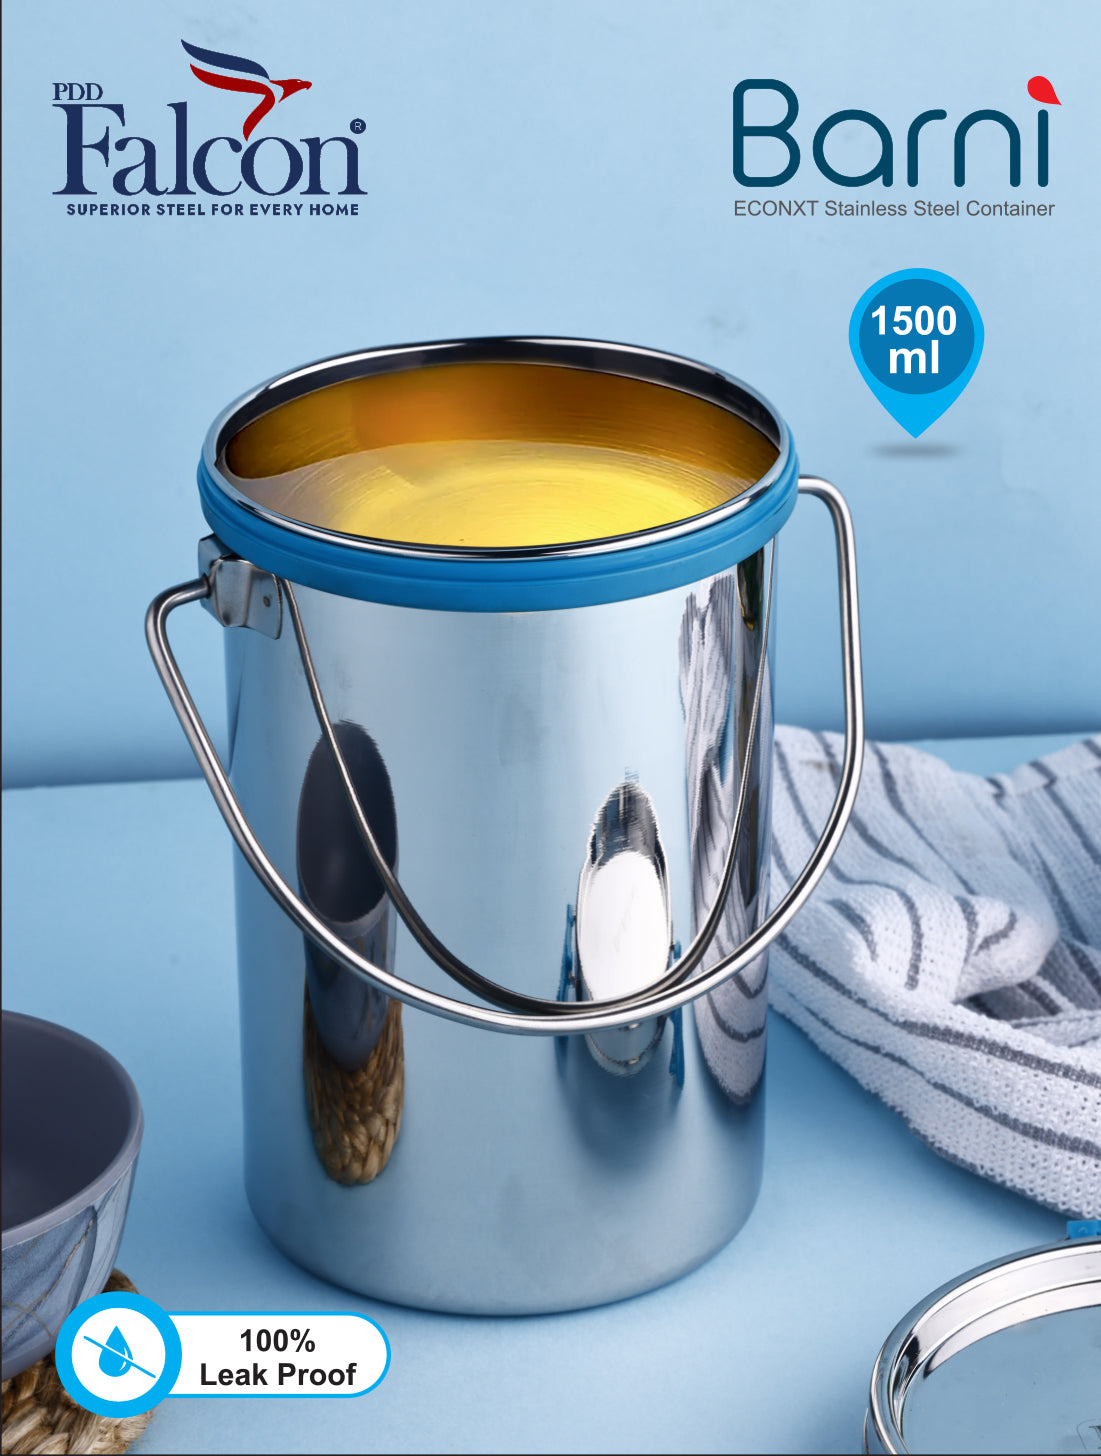 Pddfalcon Stainless Steel Akhand - Jointless Milk Can/Oil Can/Milk Barni/Oil Pot with Lid, 1500ML Capacity, 14Cm Dia, Silver